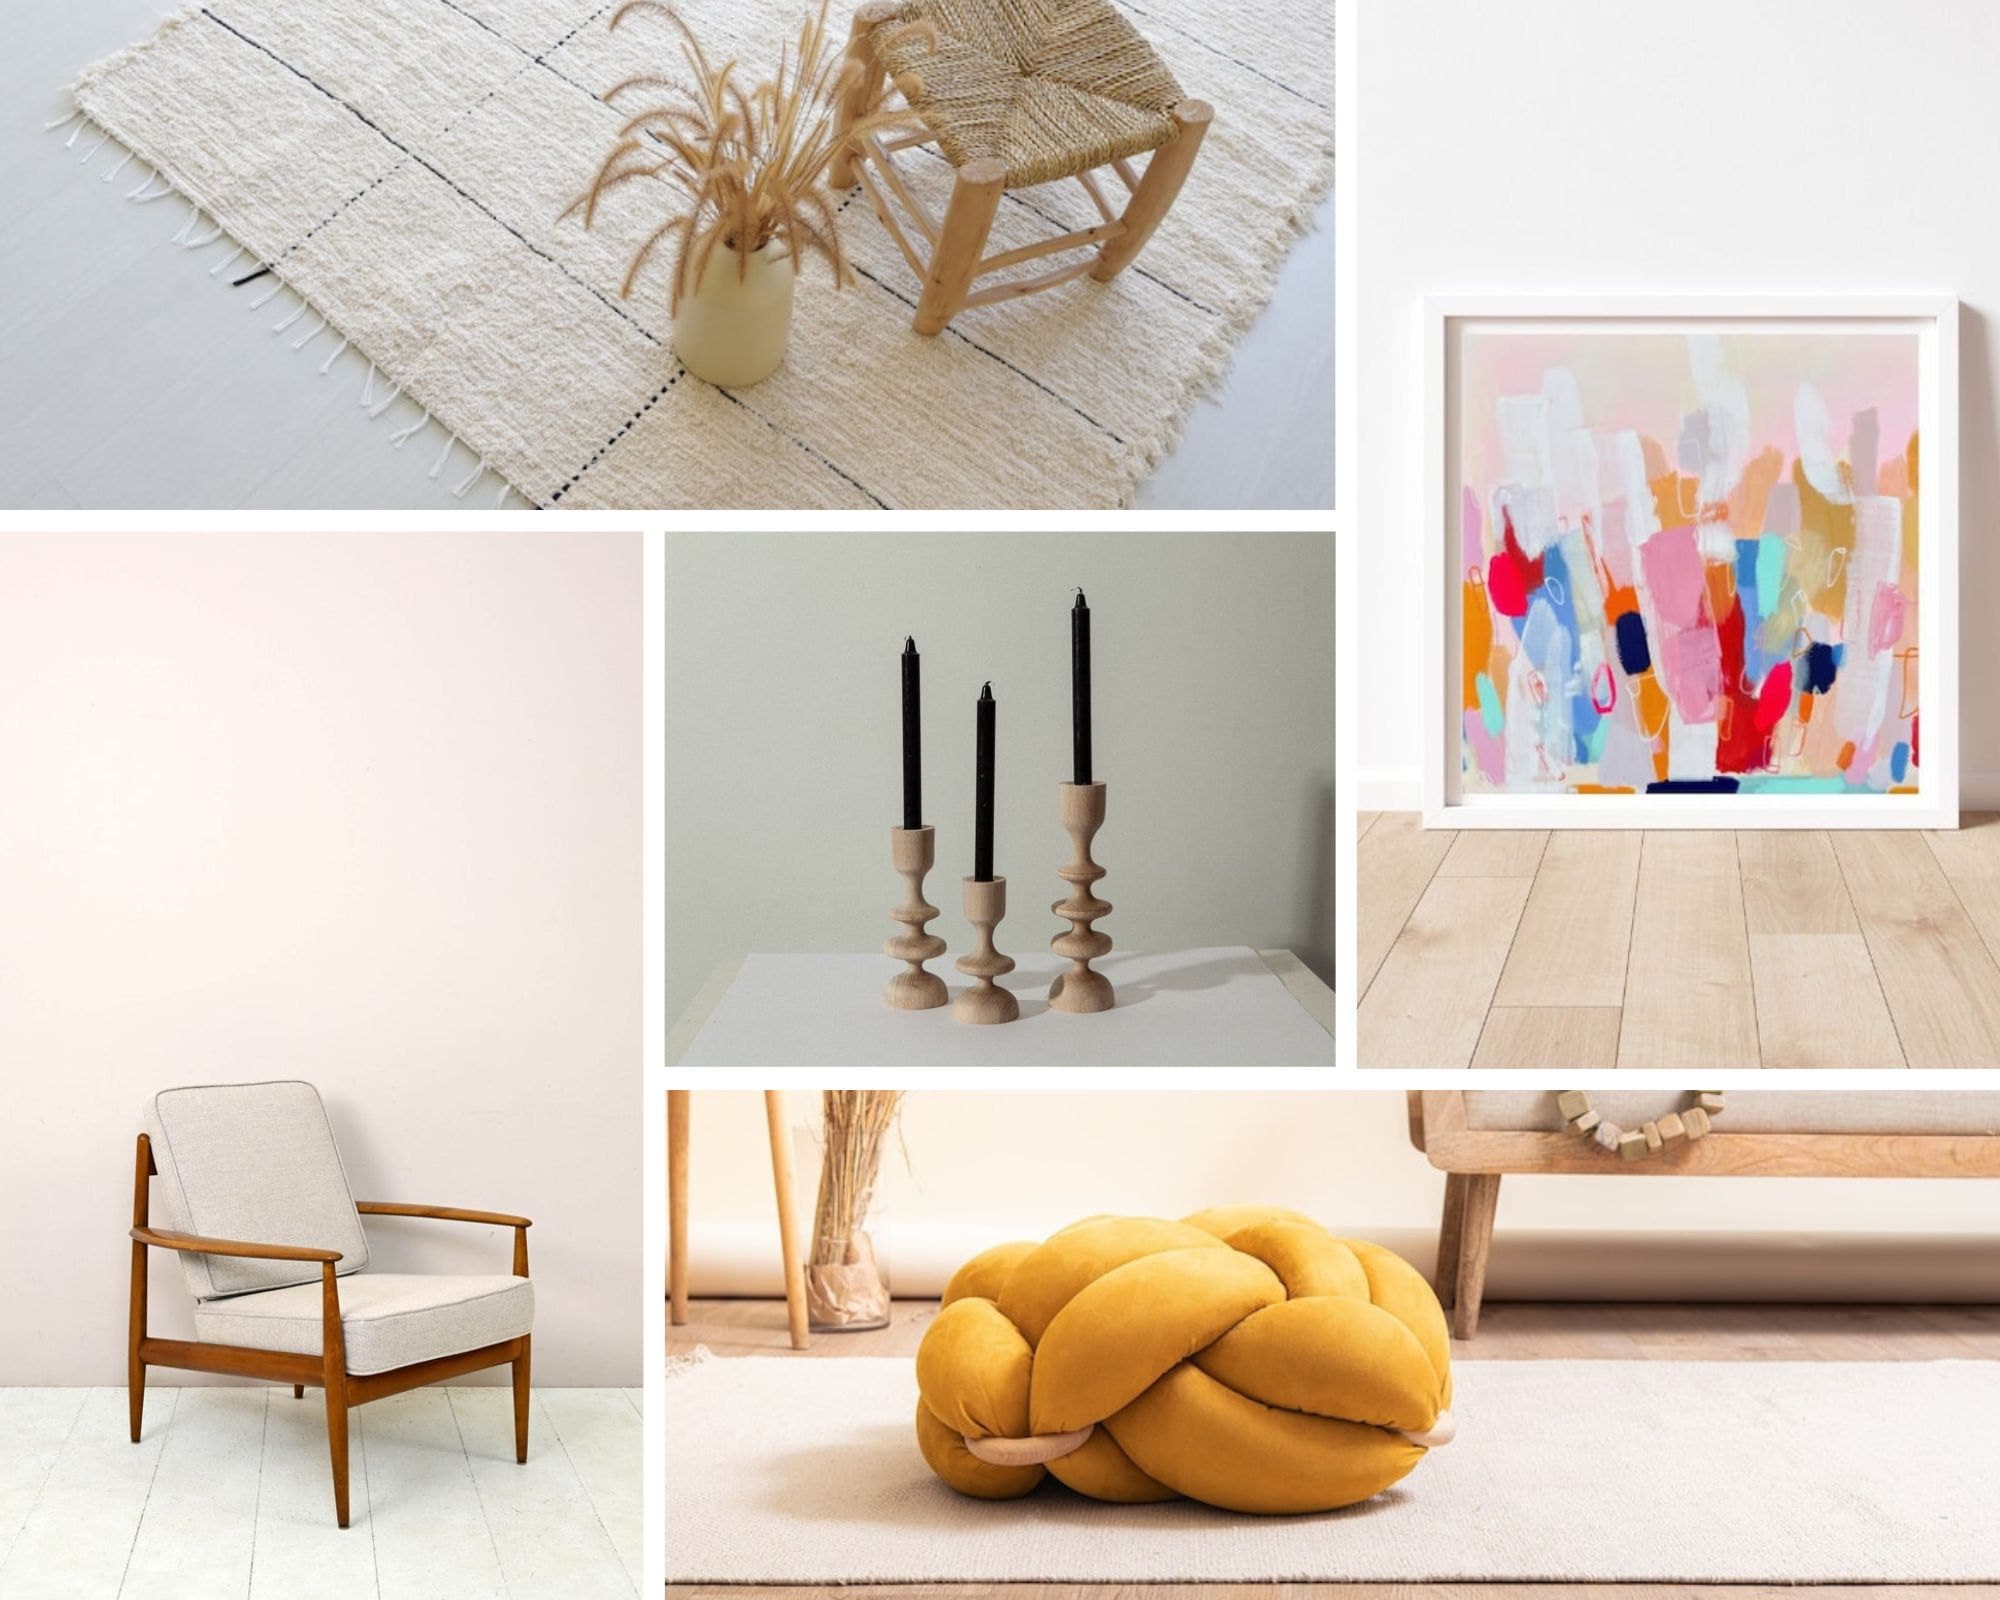 A collection of well-crafted home decor products from Etsy, including chairs, rugs, and wall art.